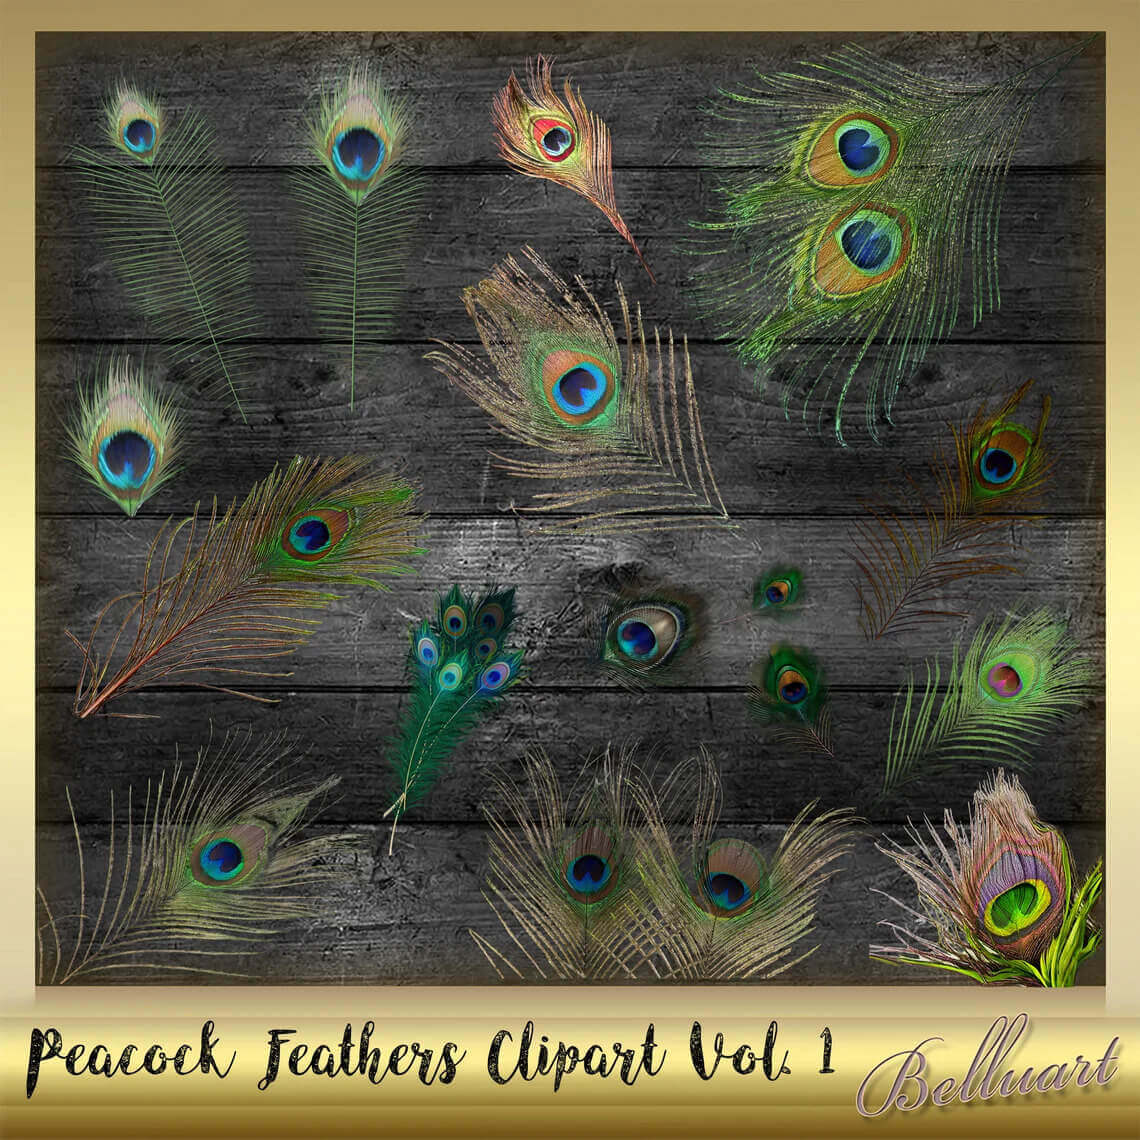 Picture of peacock feathers on a wooden background.